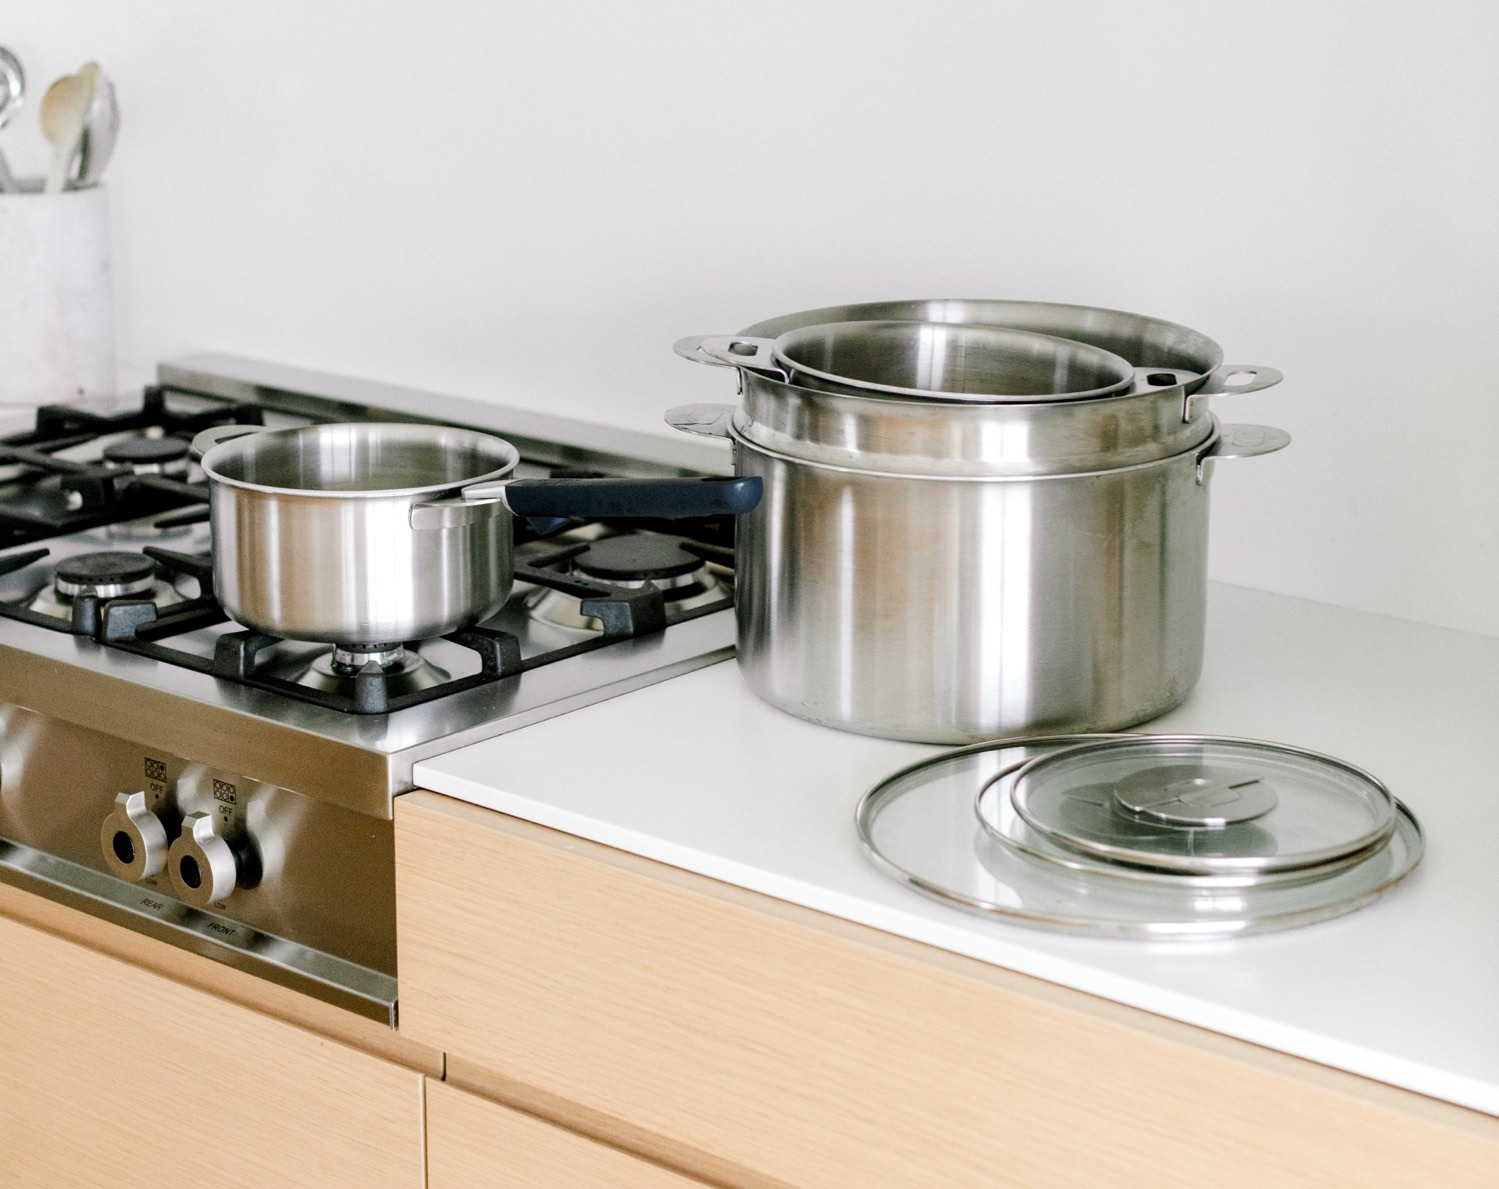 'ENSEMBL Stackware stainless steel cookware on the stove